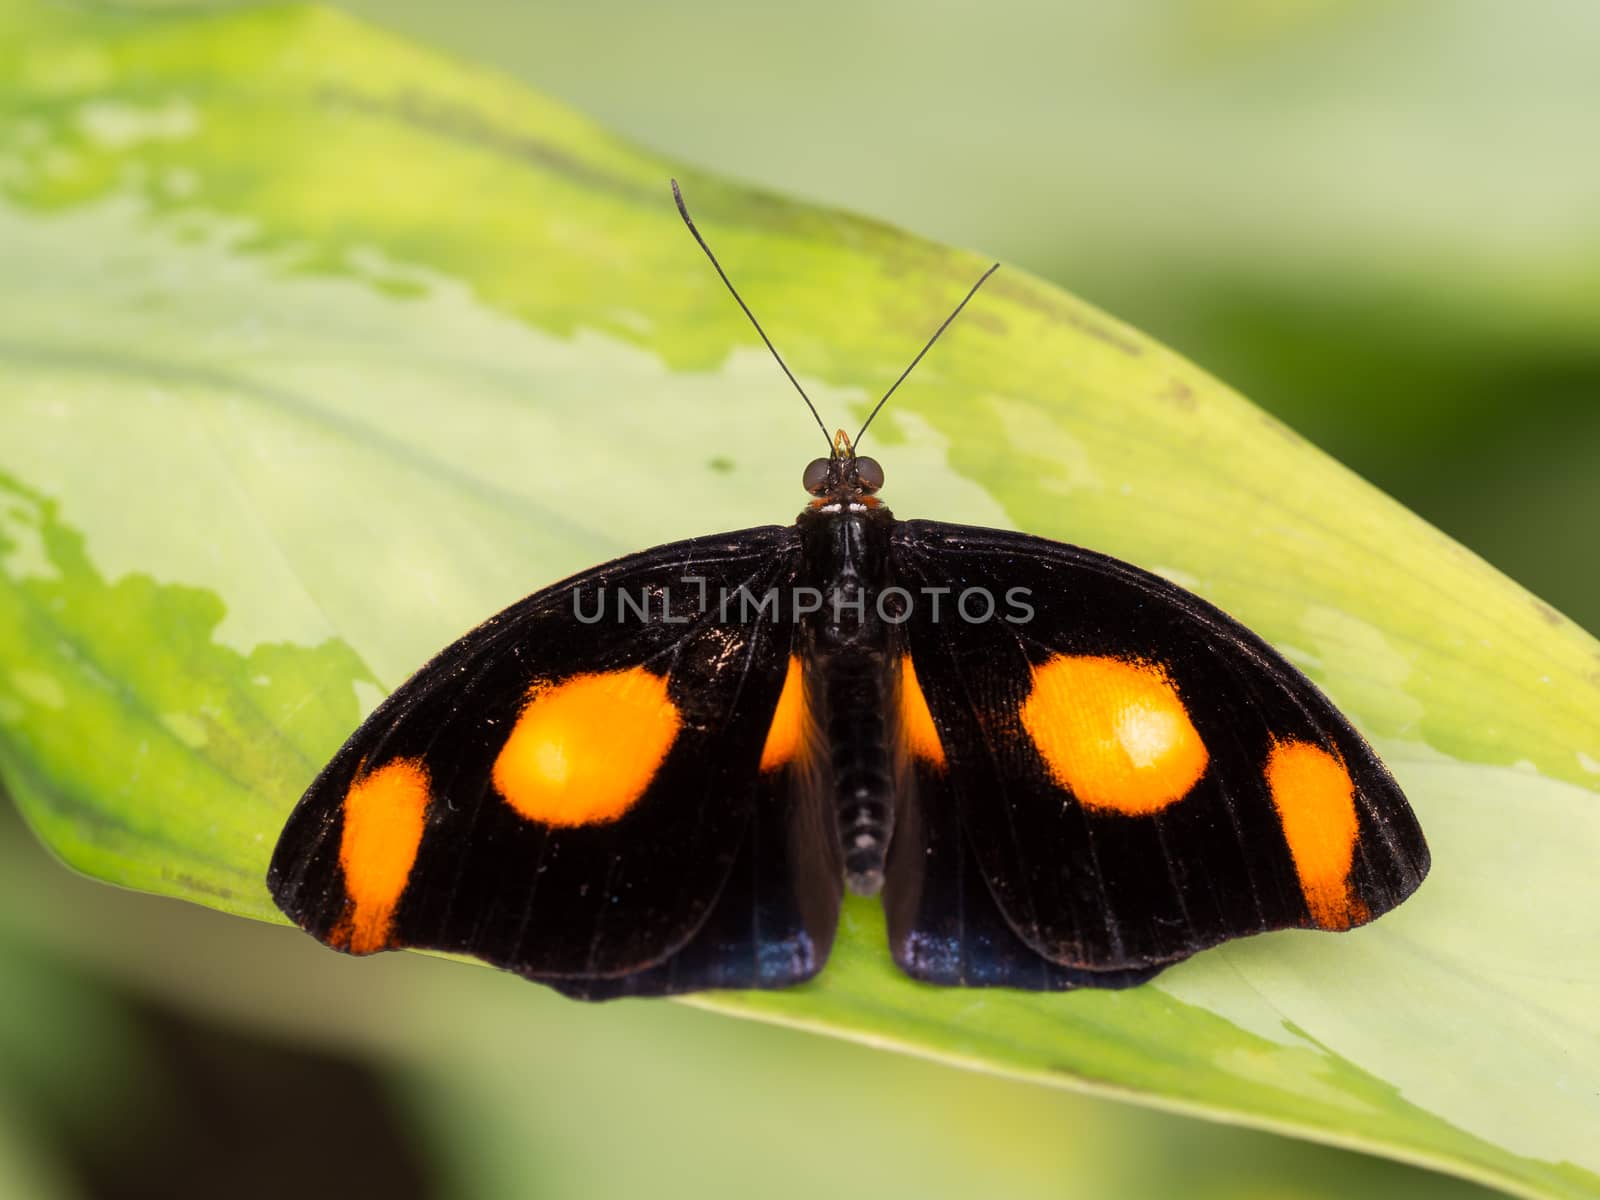 Black and orange spotted tropical butterfly showing full wingspan on a bright green leaf